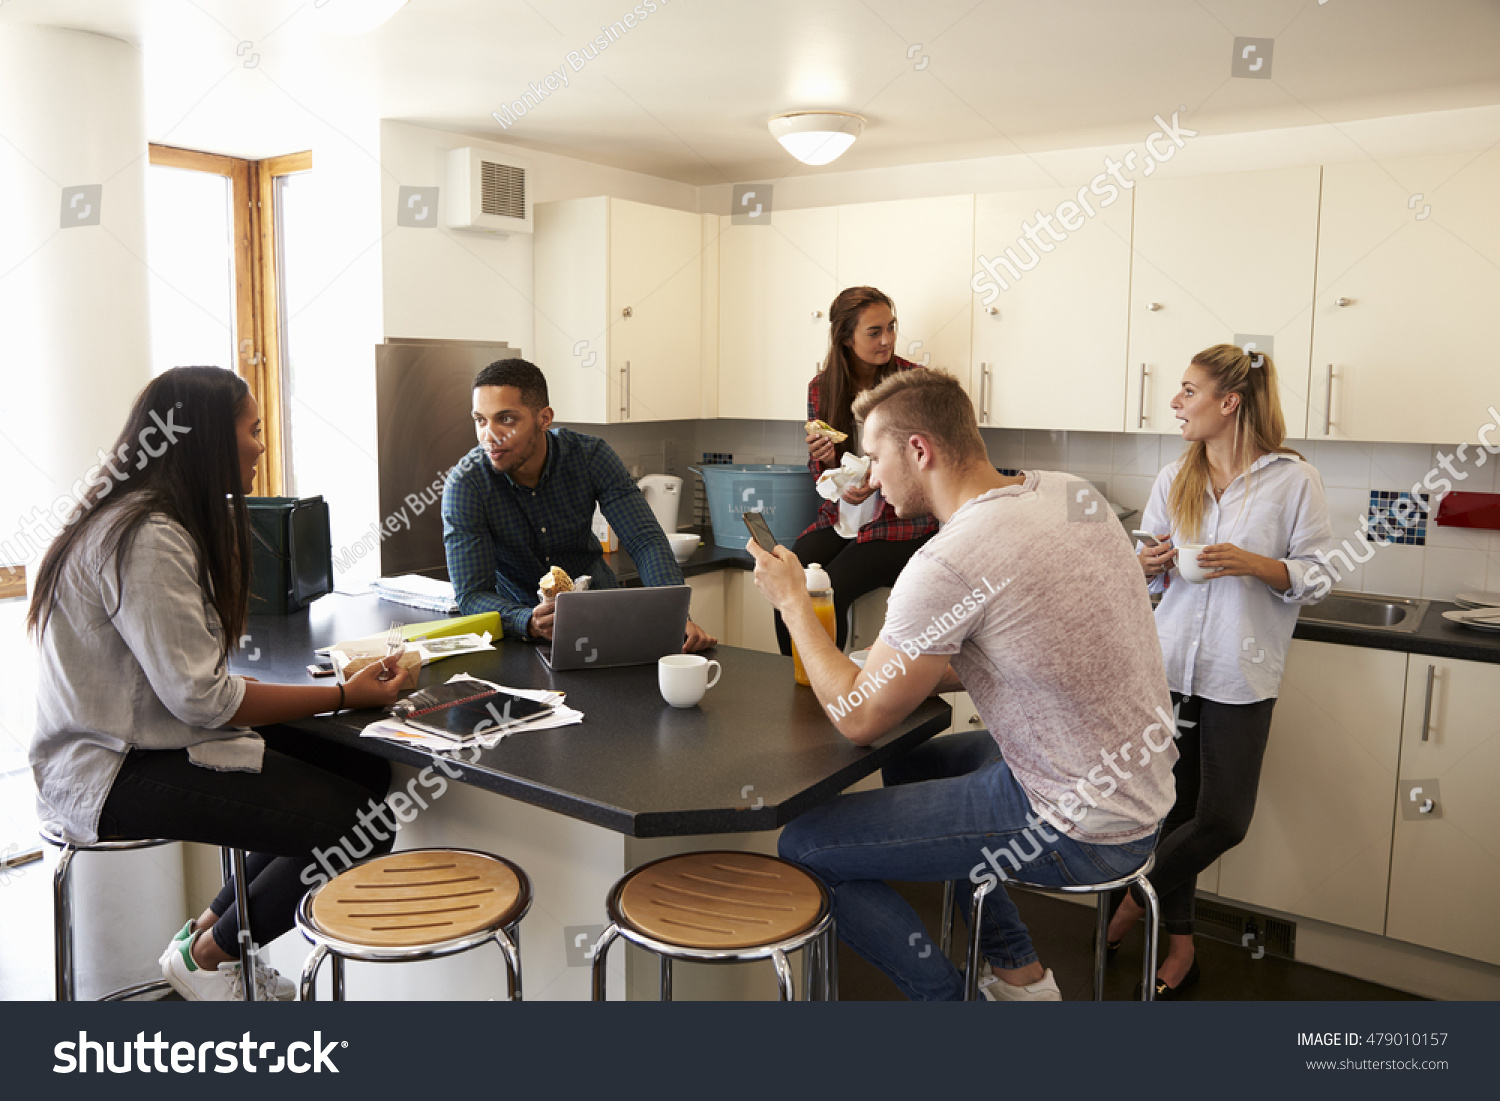 Students Relaxing In Kitchen Of Shared Accommodation #479010157